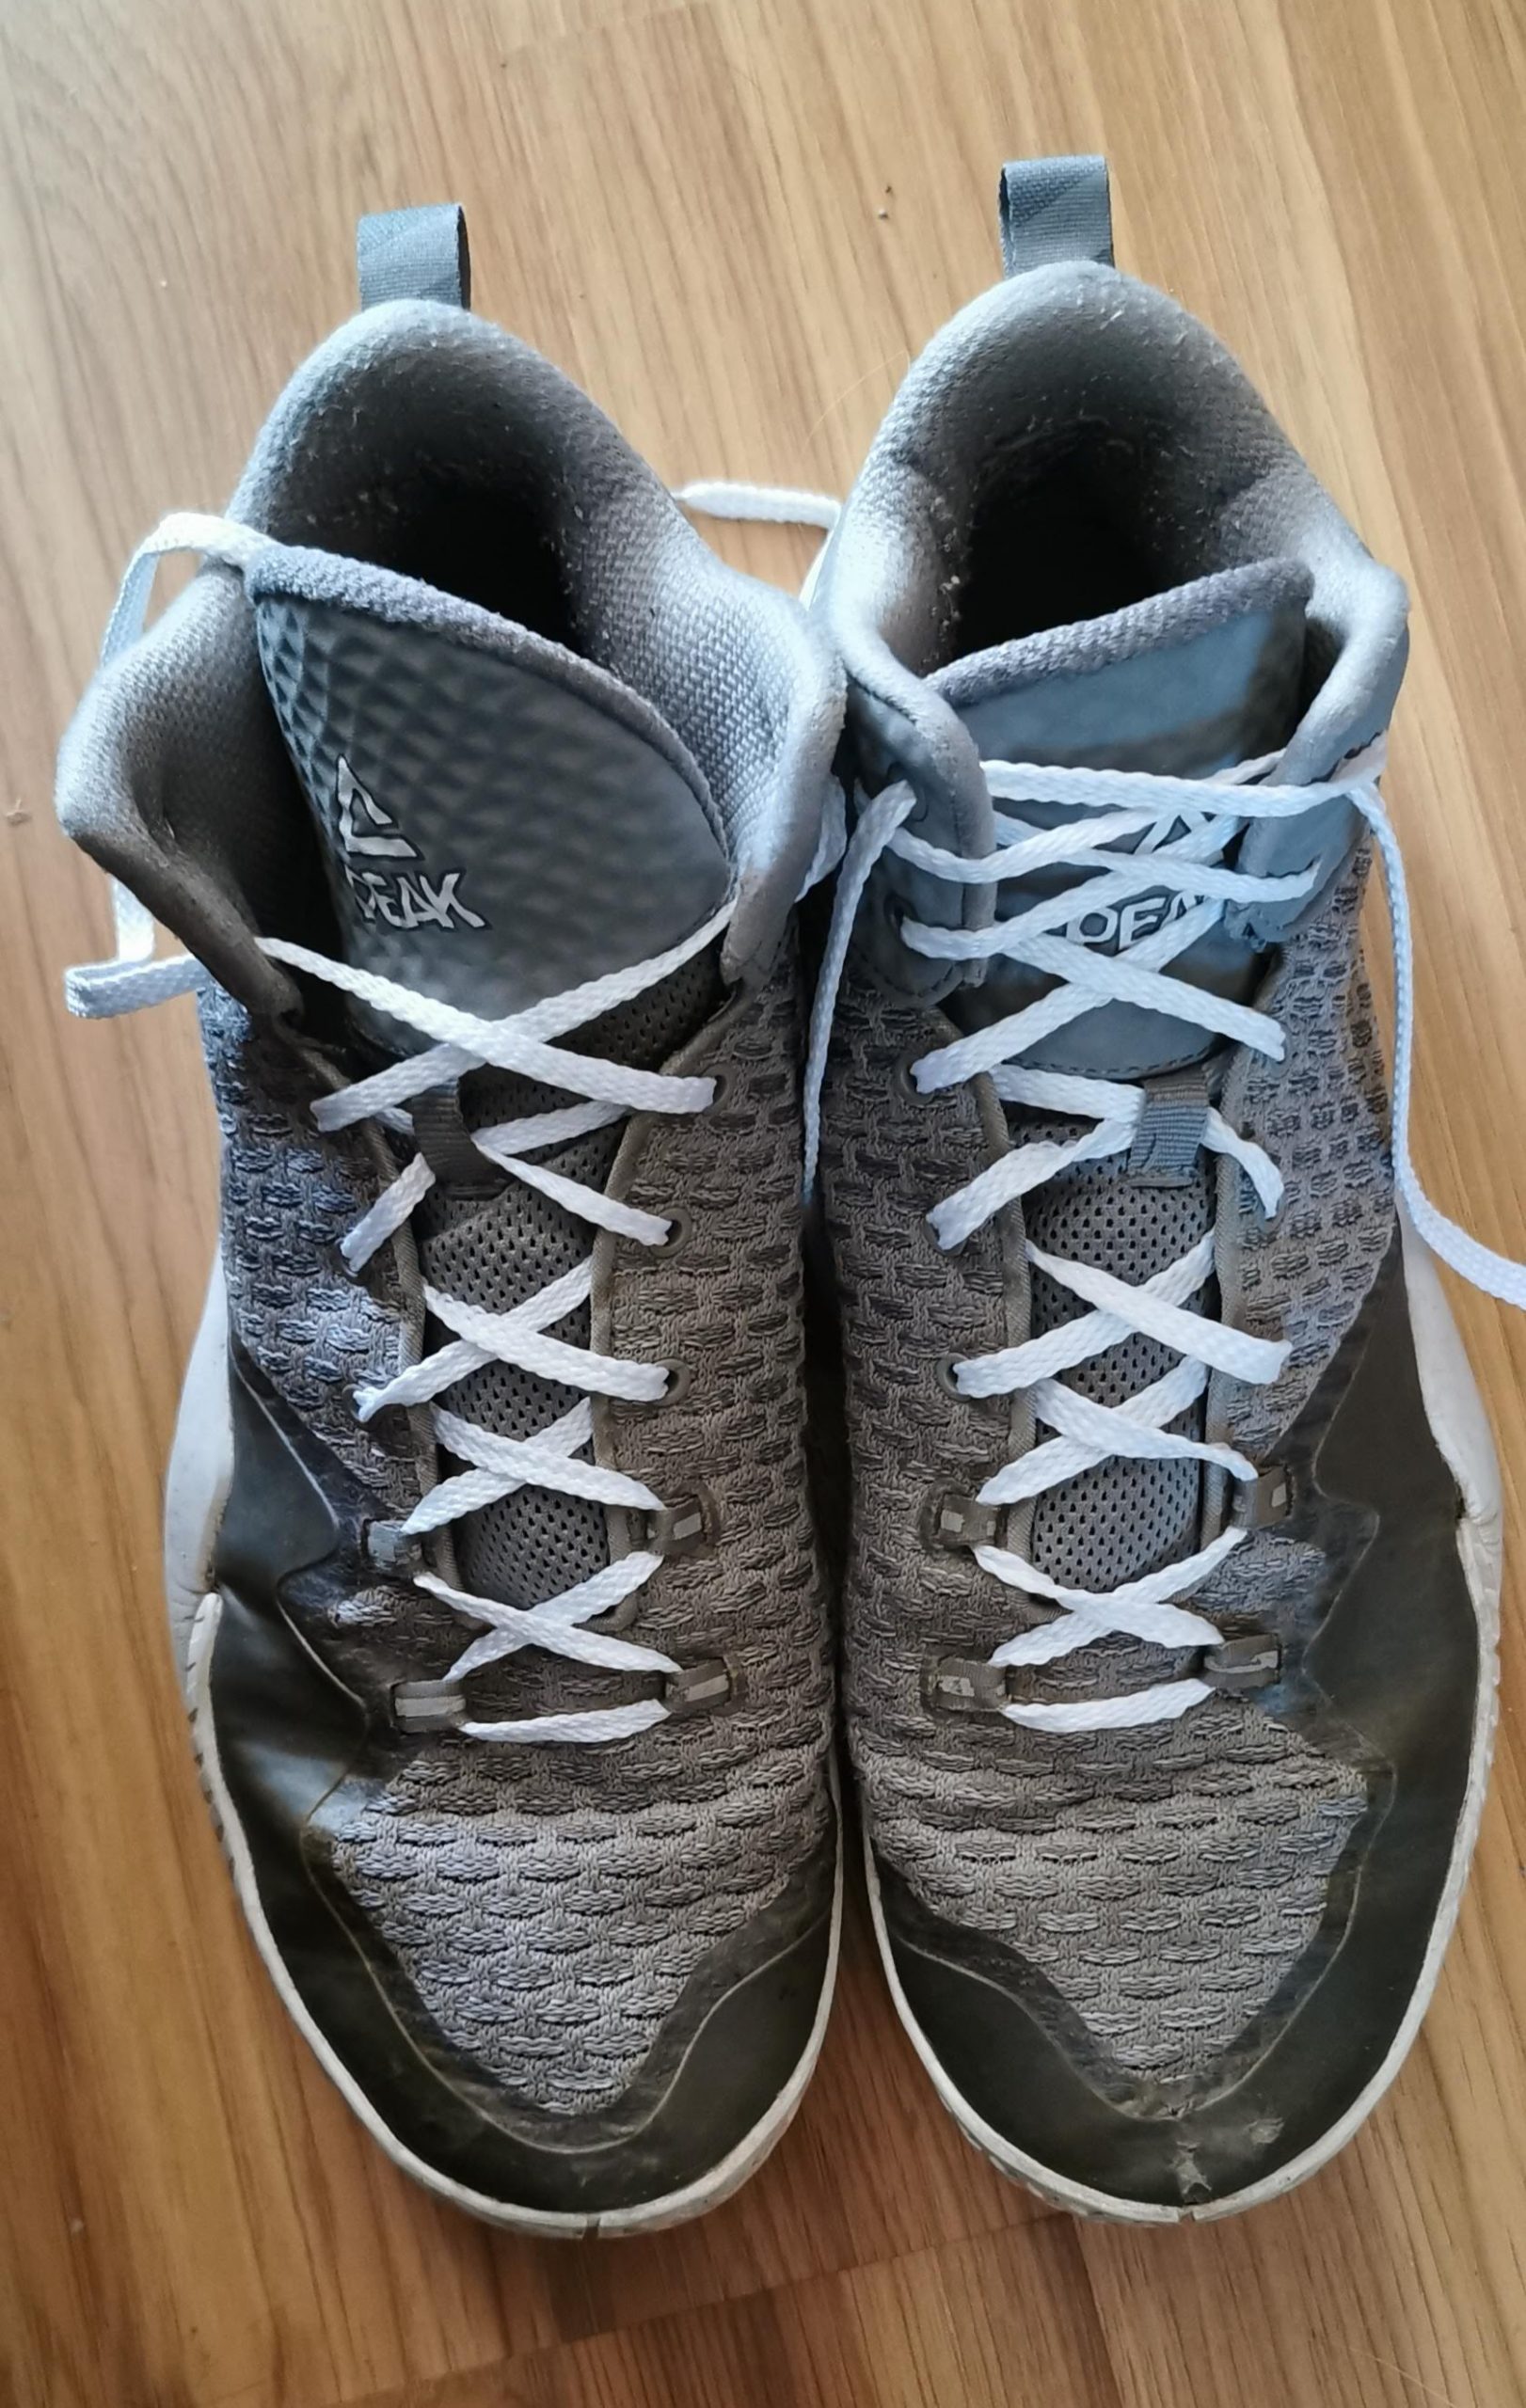 A pair of grey Peak Men's Basketball Shoes, as purchased from eBay.